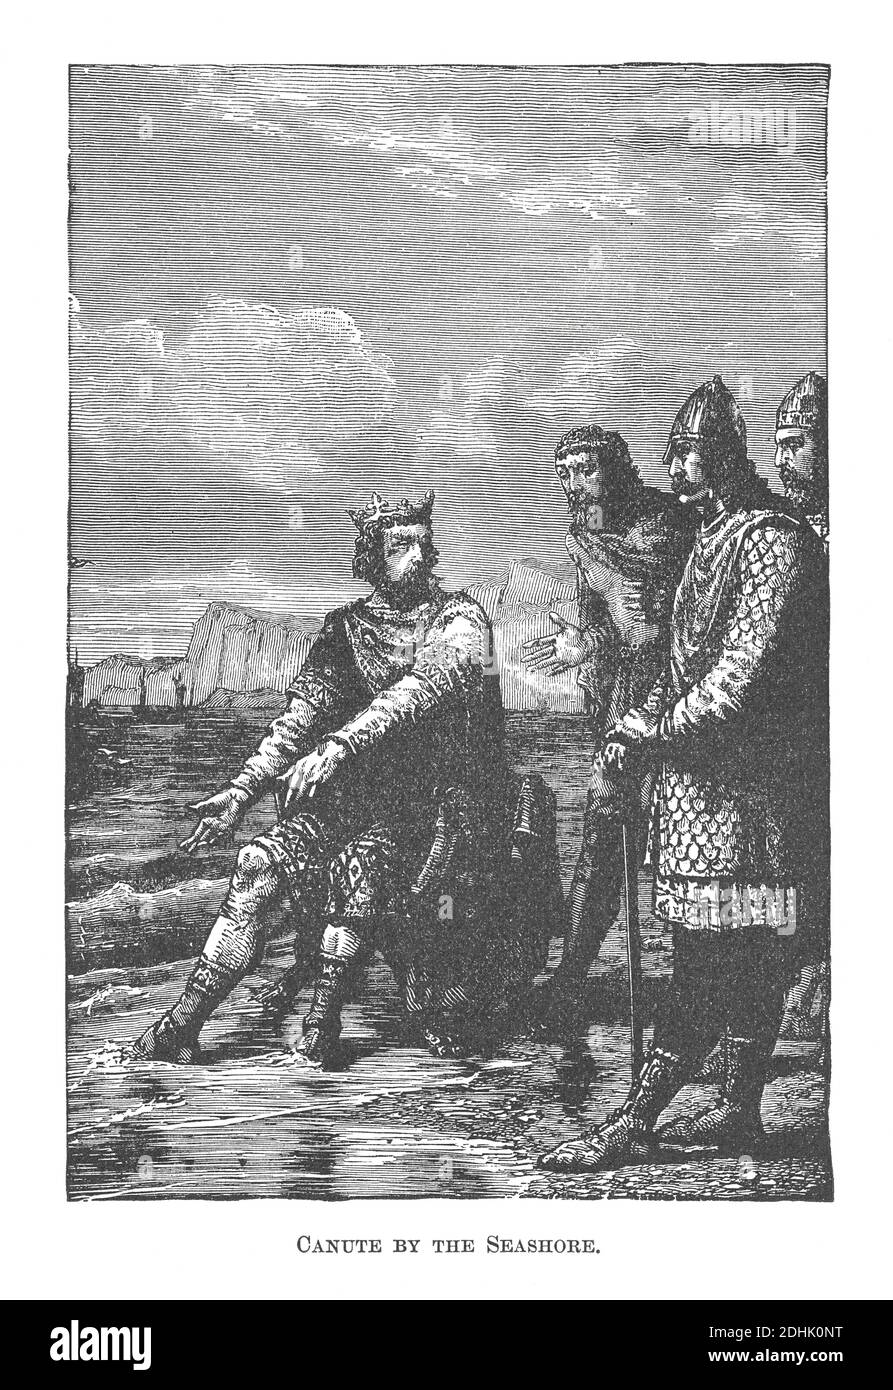 Canute I the Great (c.995-1035), Viking King of England, Denmark, Norway,  Canute demonstrating to his flatters that only God can command the tides,  From The Imperial History of England by Theophilus Camden (